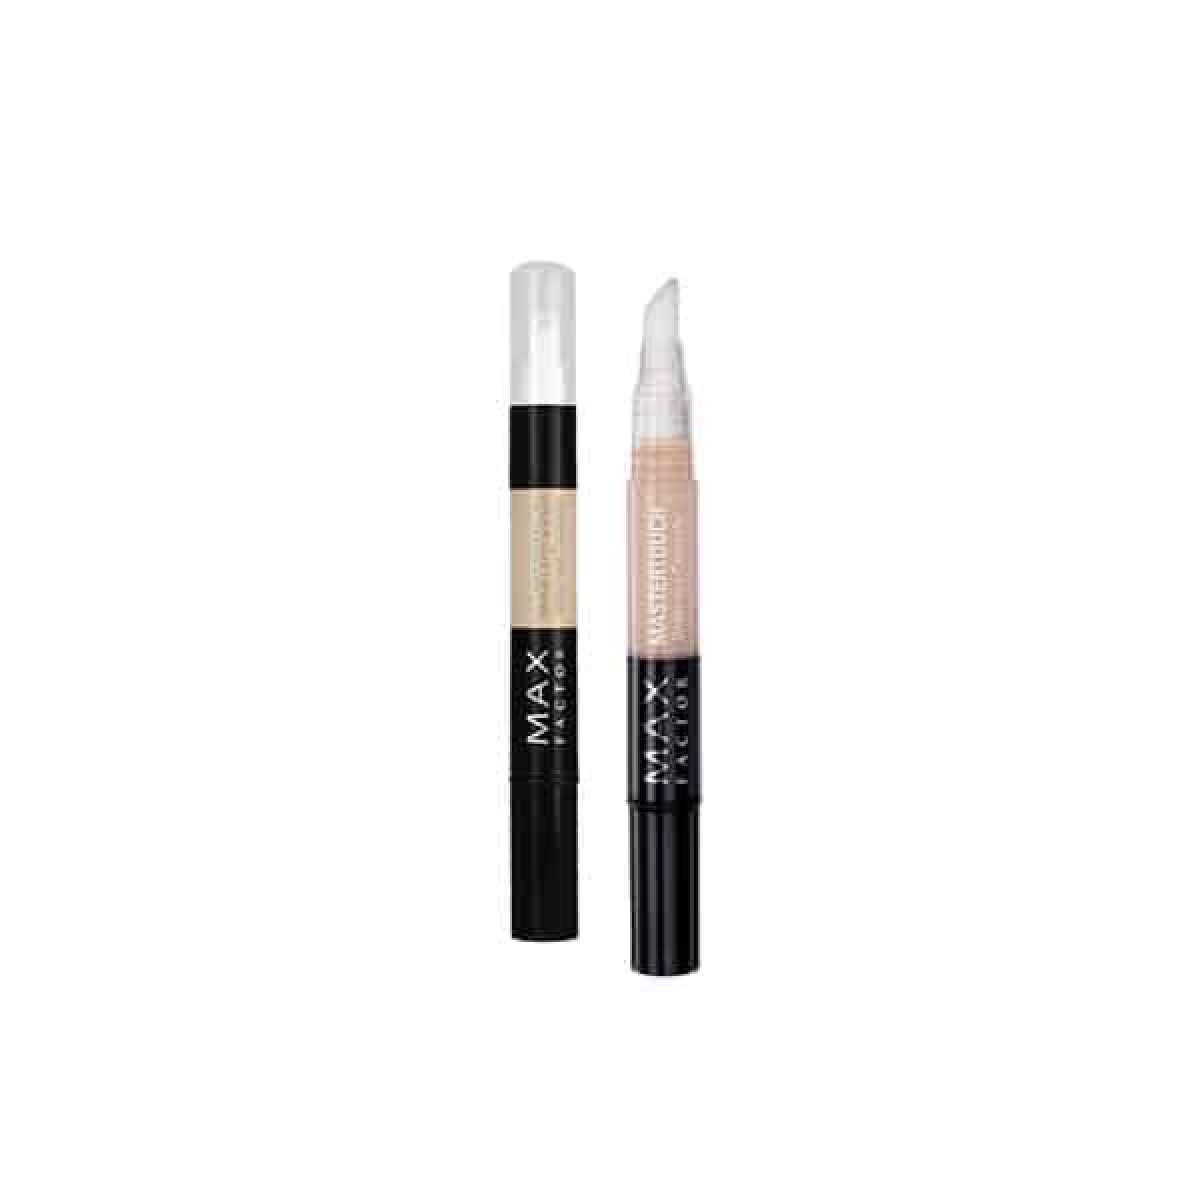 Max Factor Mastertouch Concealer 309 